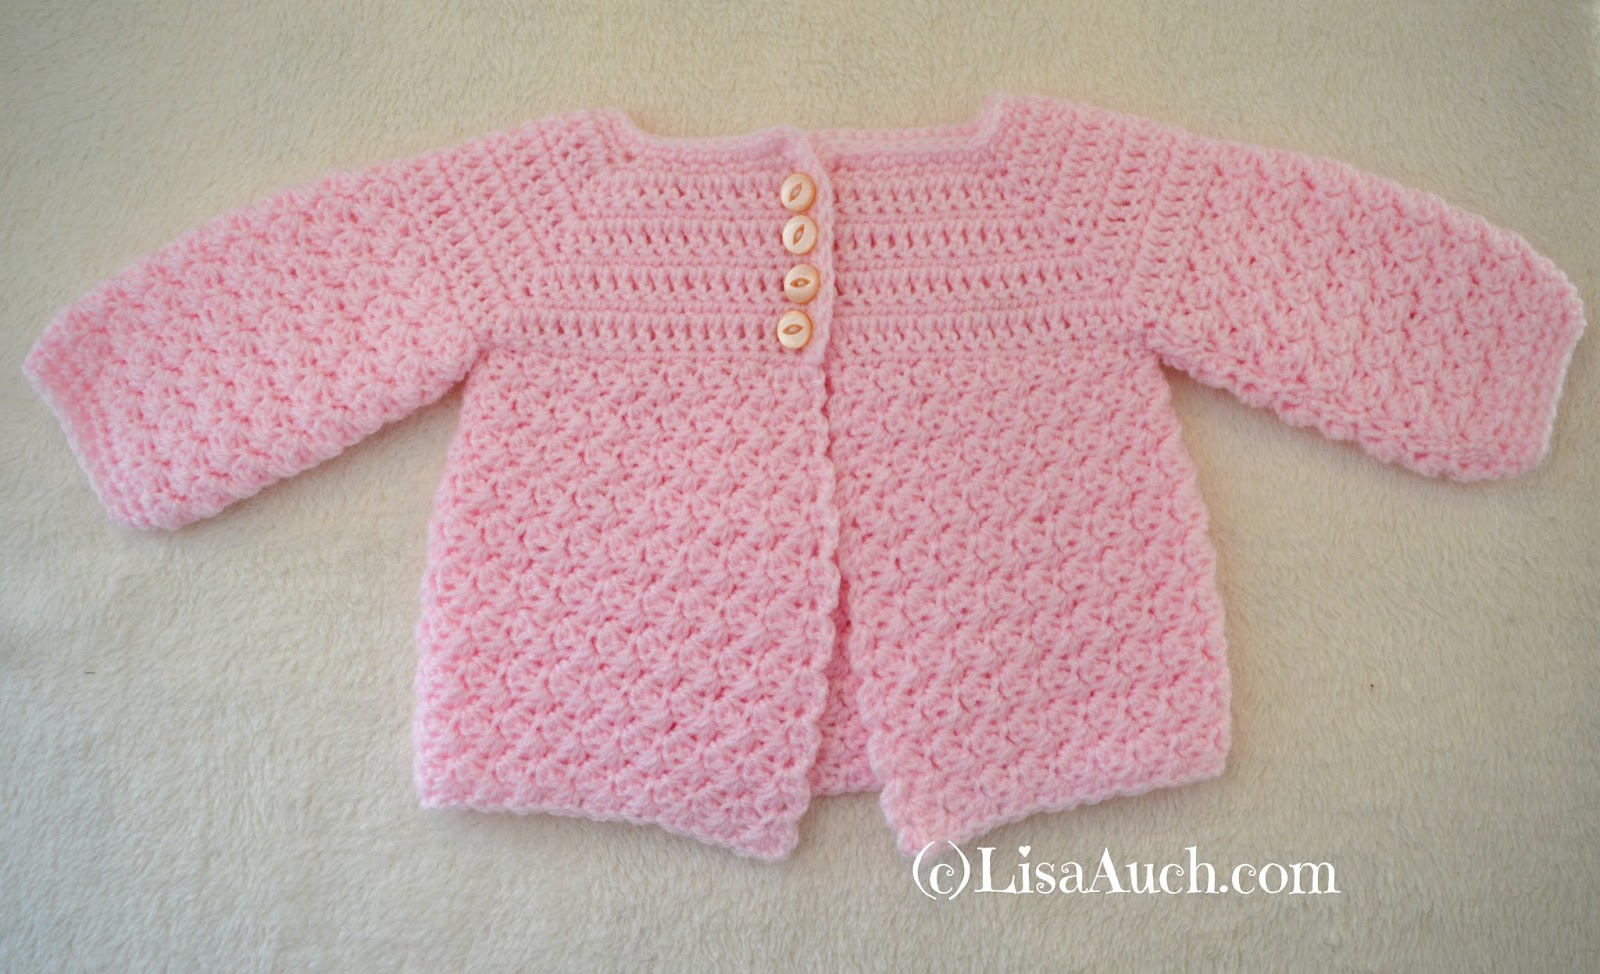 Free Crochet Patterns And Designs By Lisaauch Sweet Sugar Crochet Baby Cardigan Easy Free Pattern